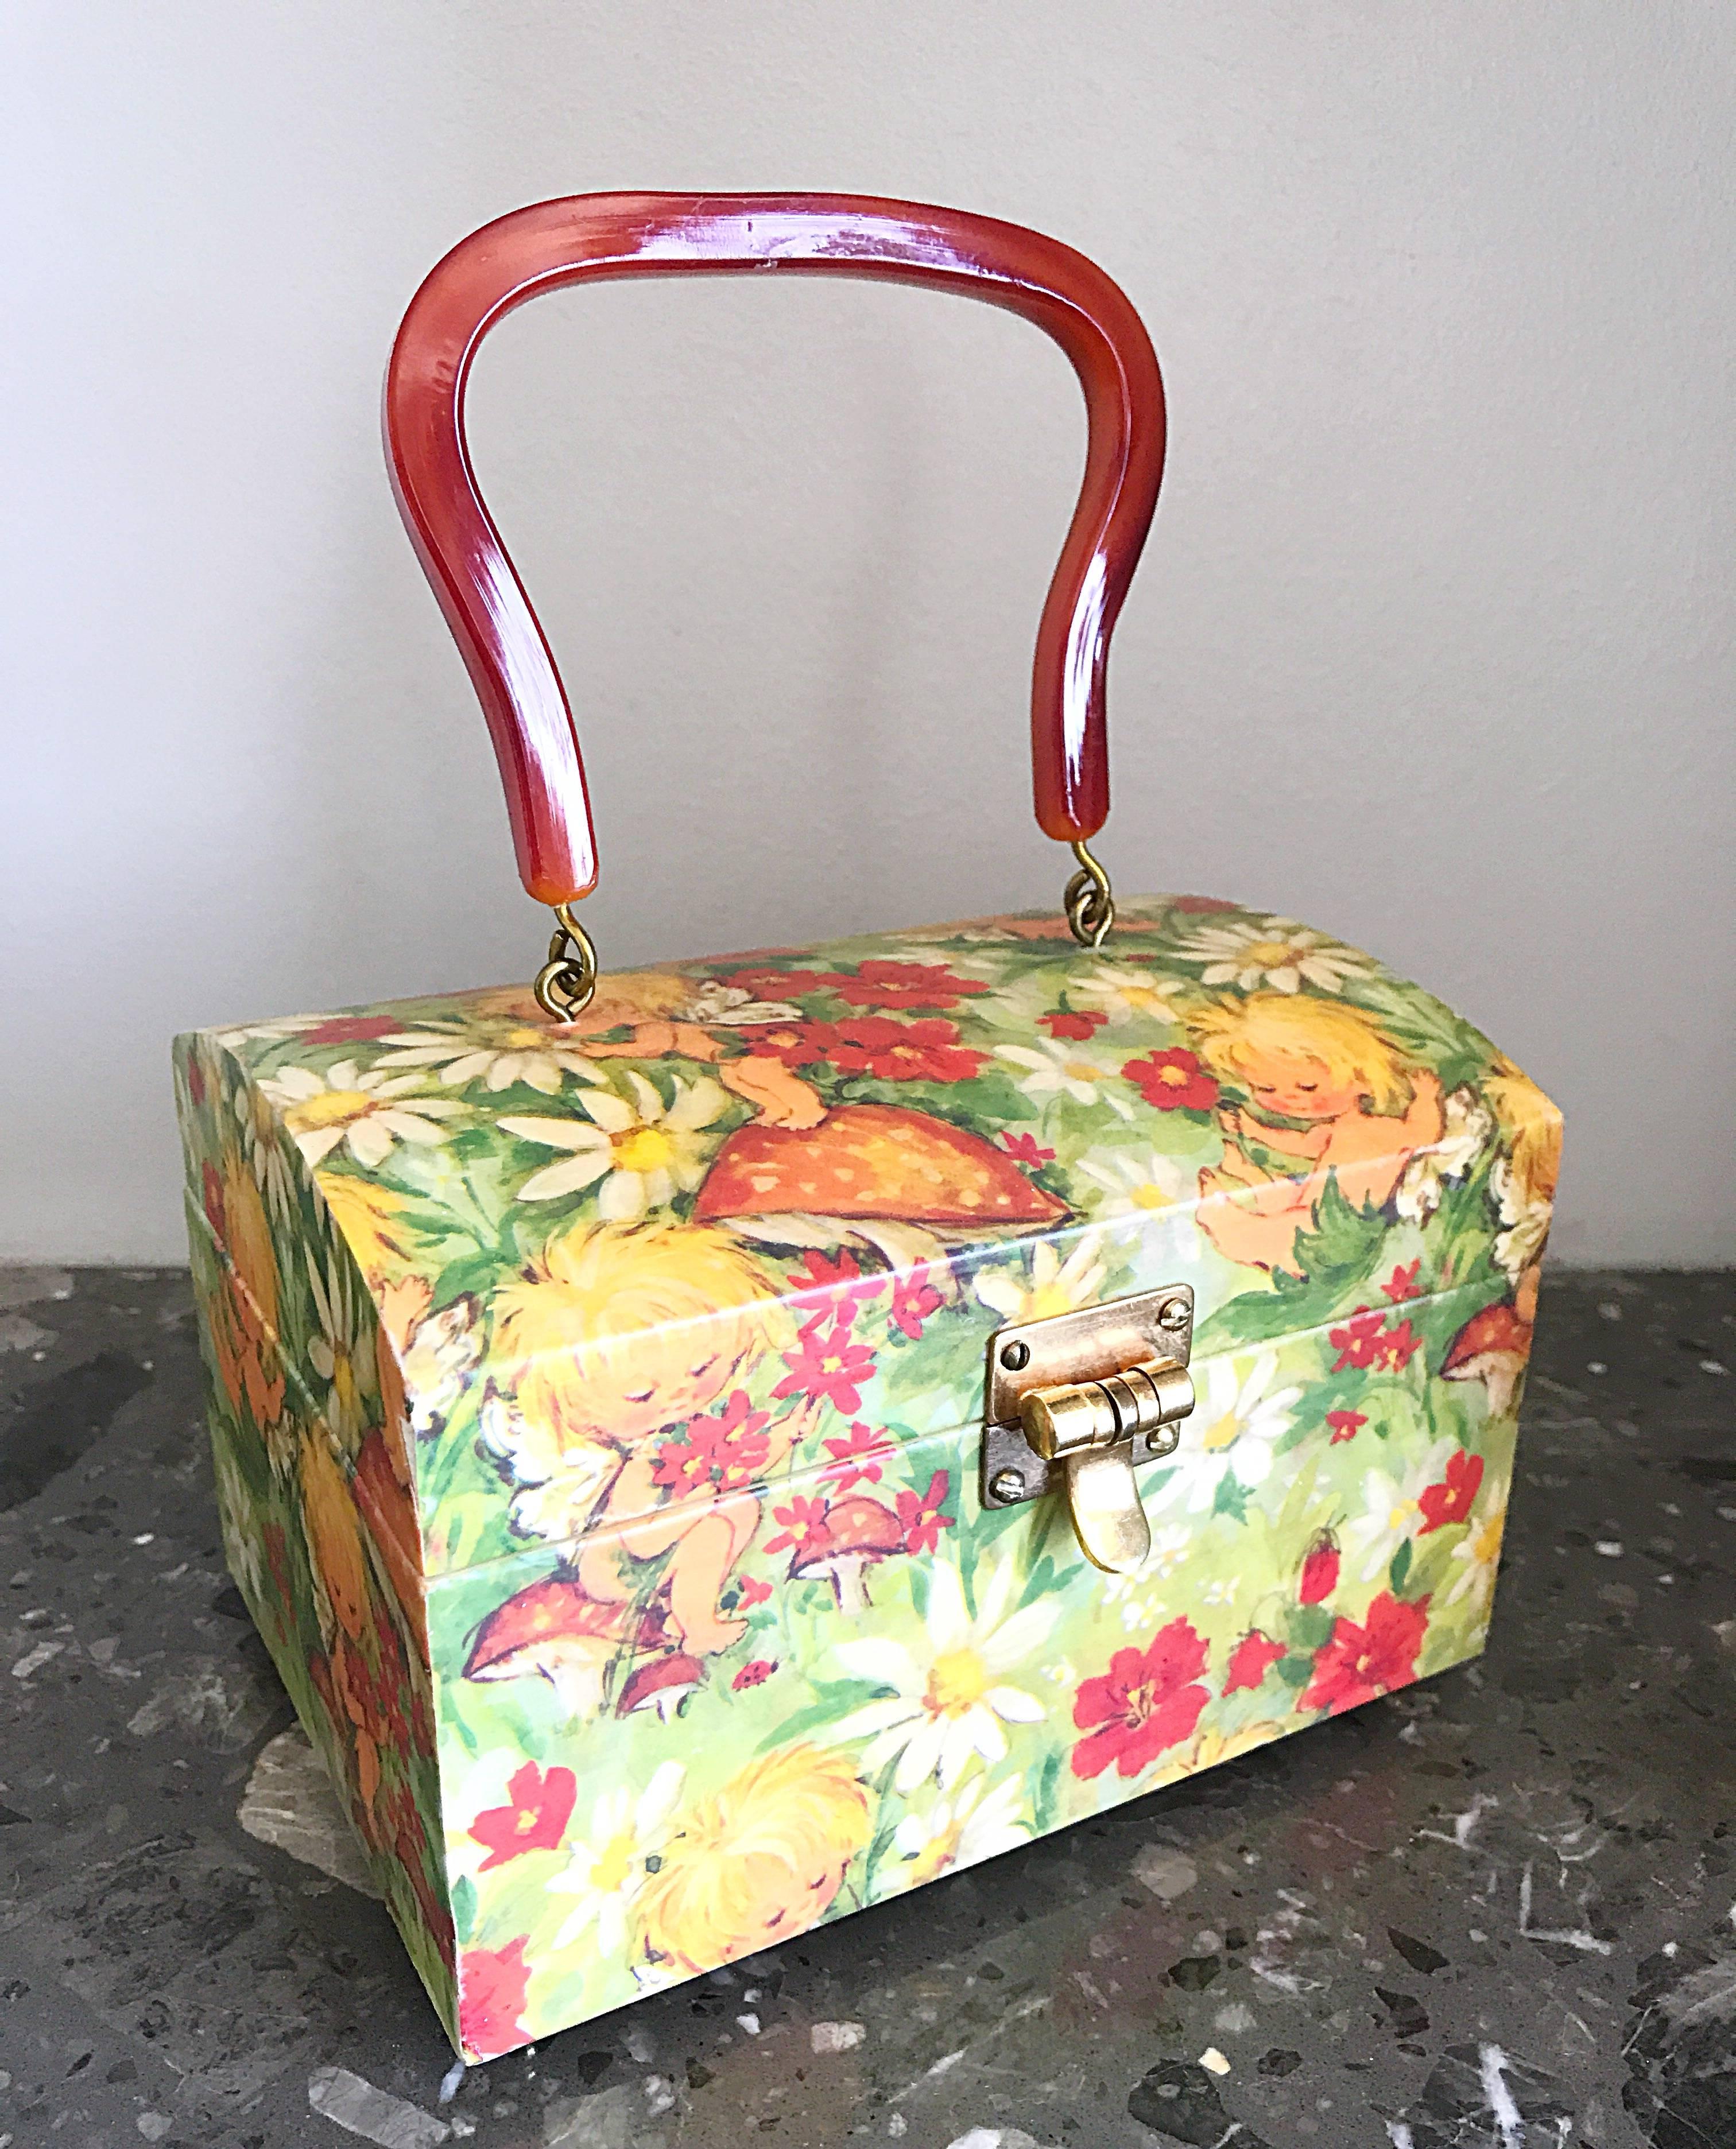 Rare mid 1970s ILEENE REEVES hand painted plexiglass novelty handbag! Features fairies, flowers, mushrooms and daisies throughout. Secure front closure. Interior features a mirror on the top inside. Amber colored lucite handle. The perfect size to